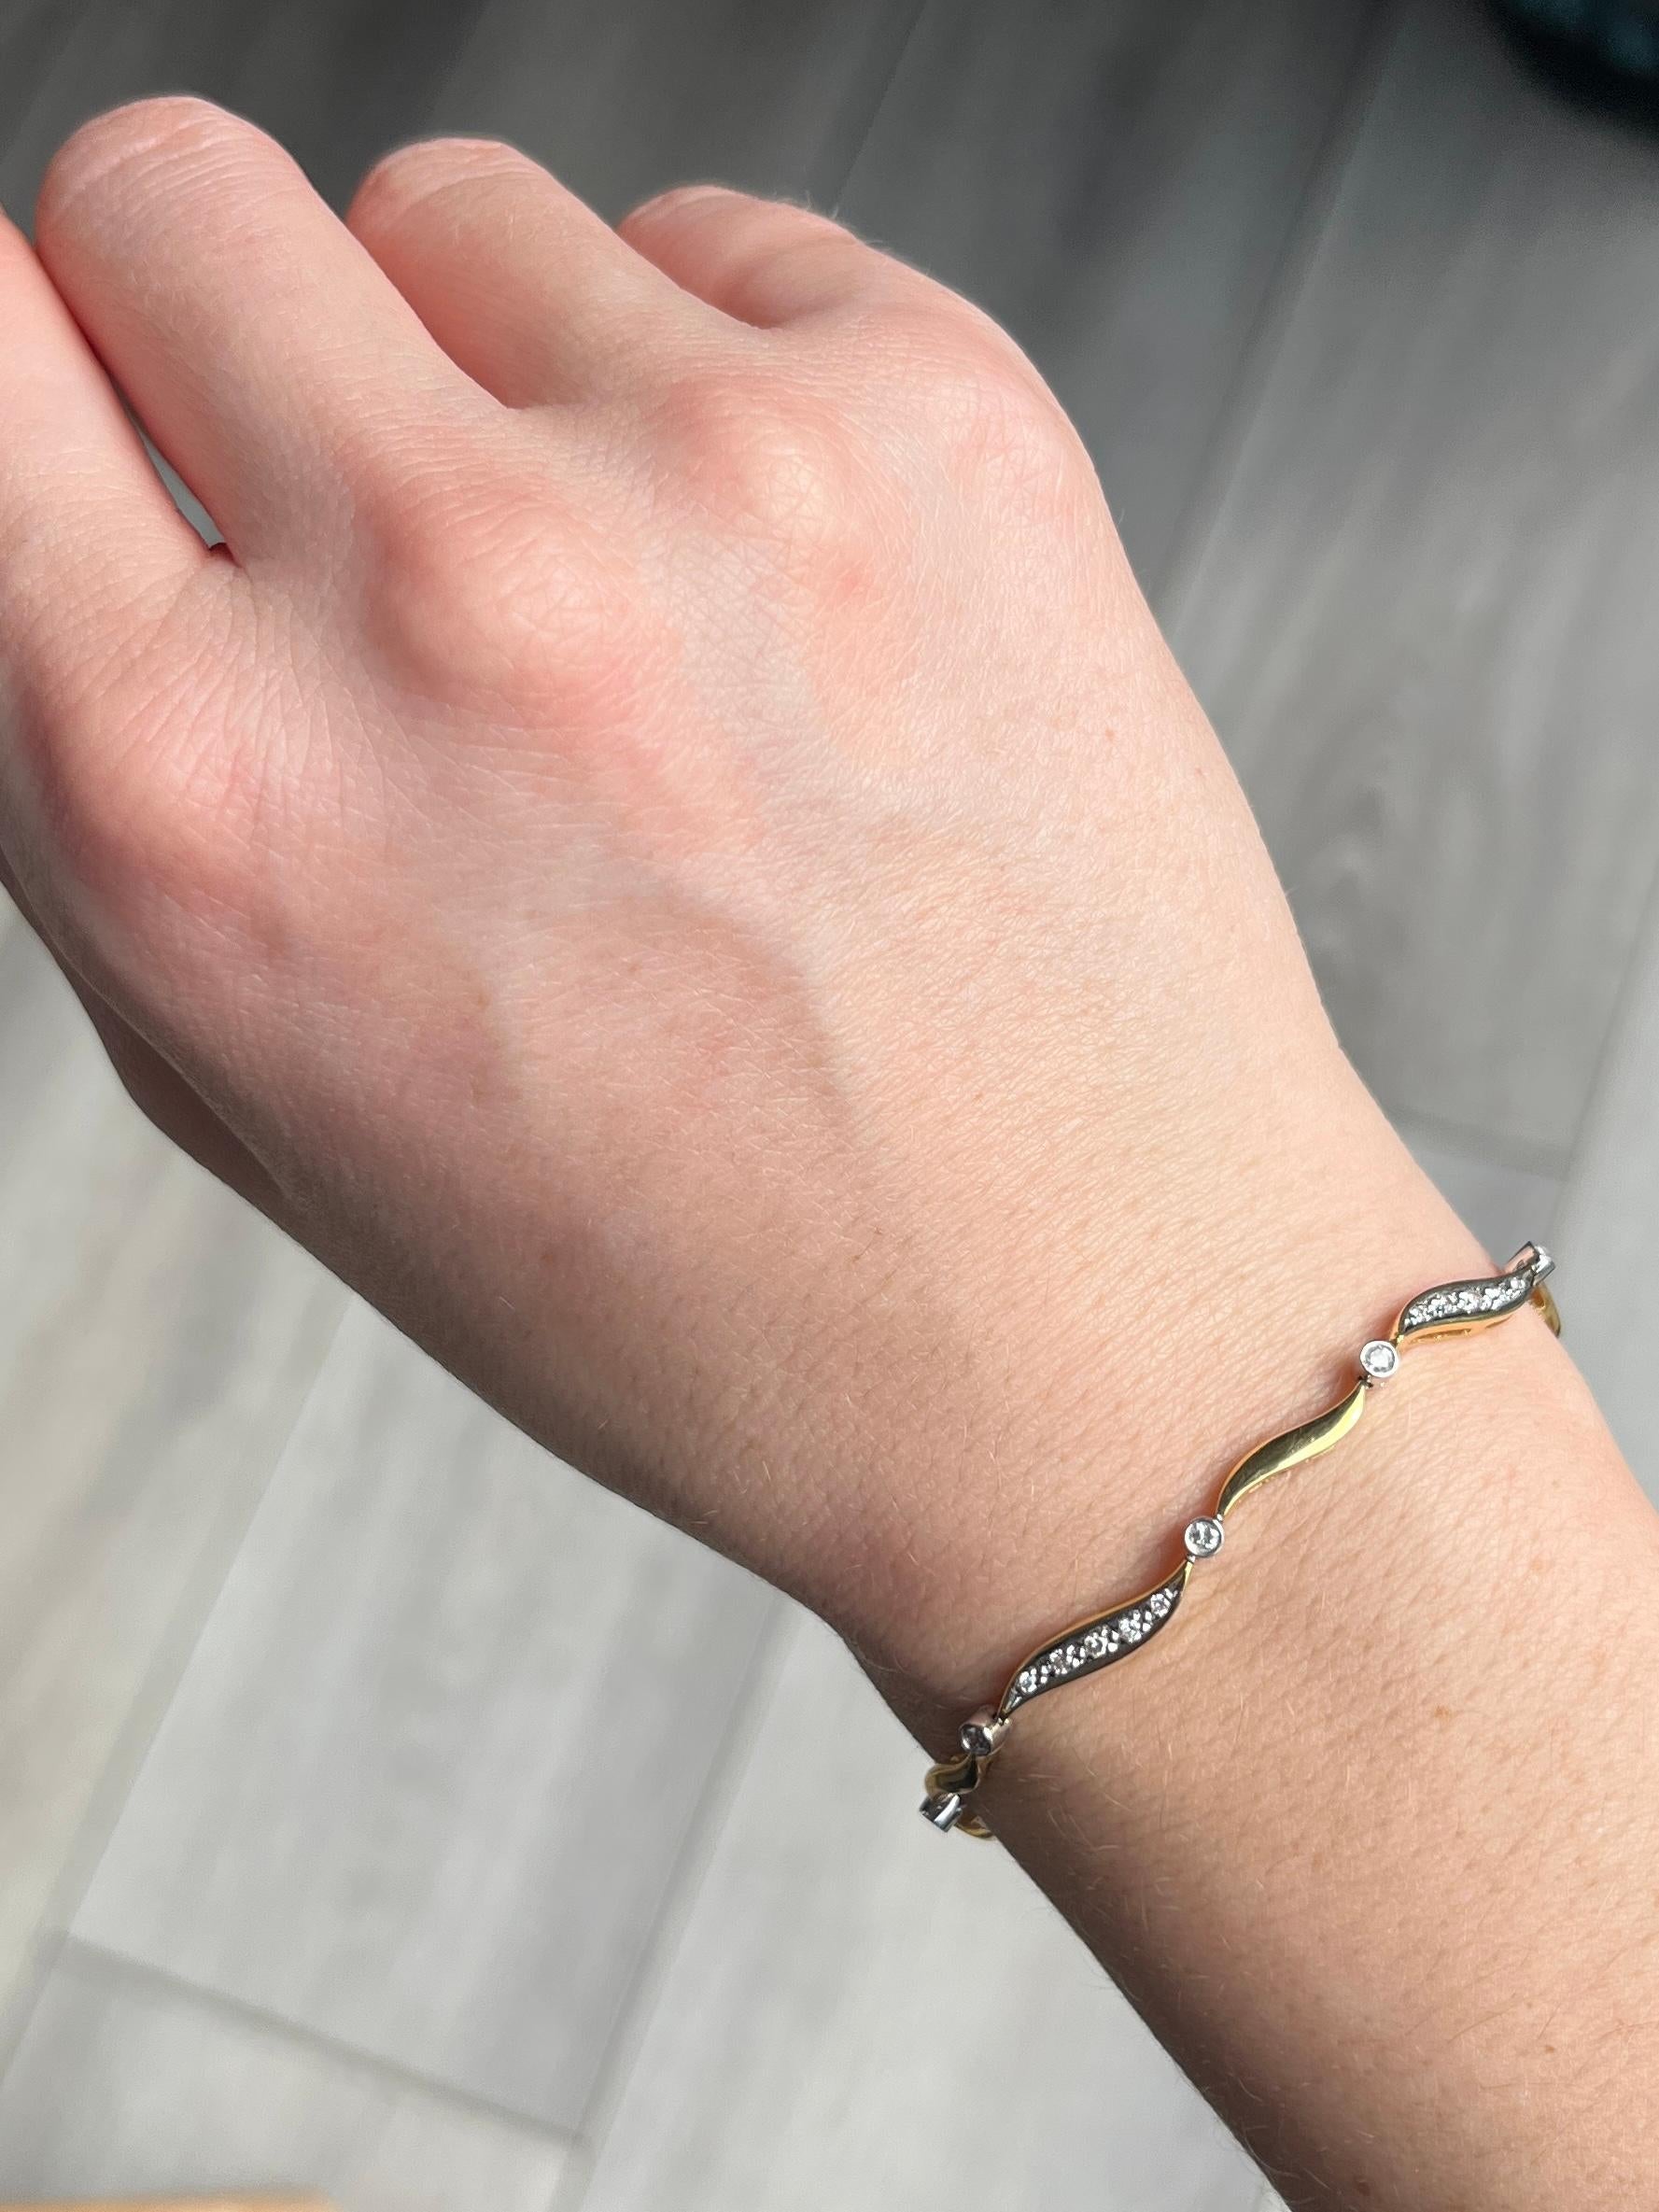 This fabulous bracelet is made up of 10 waved links. Every other links have diamonds set within them and in-between every waved link there is a diamond in a simple round setting. The single diamond measures 4pts and the encrusted wave link total